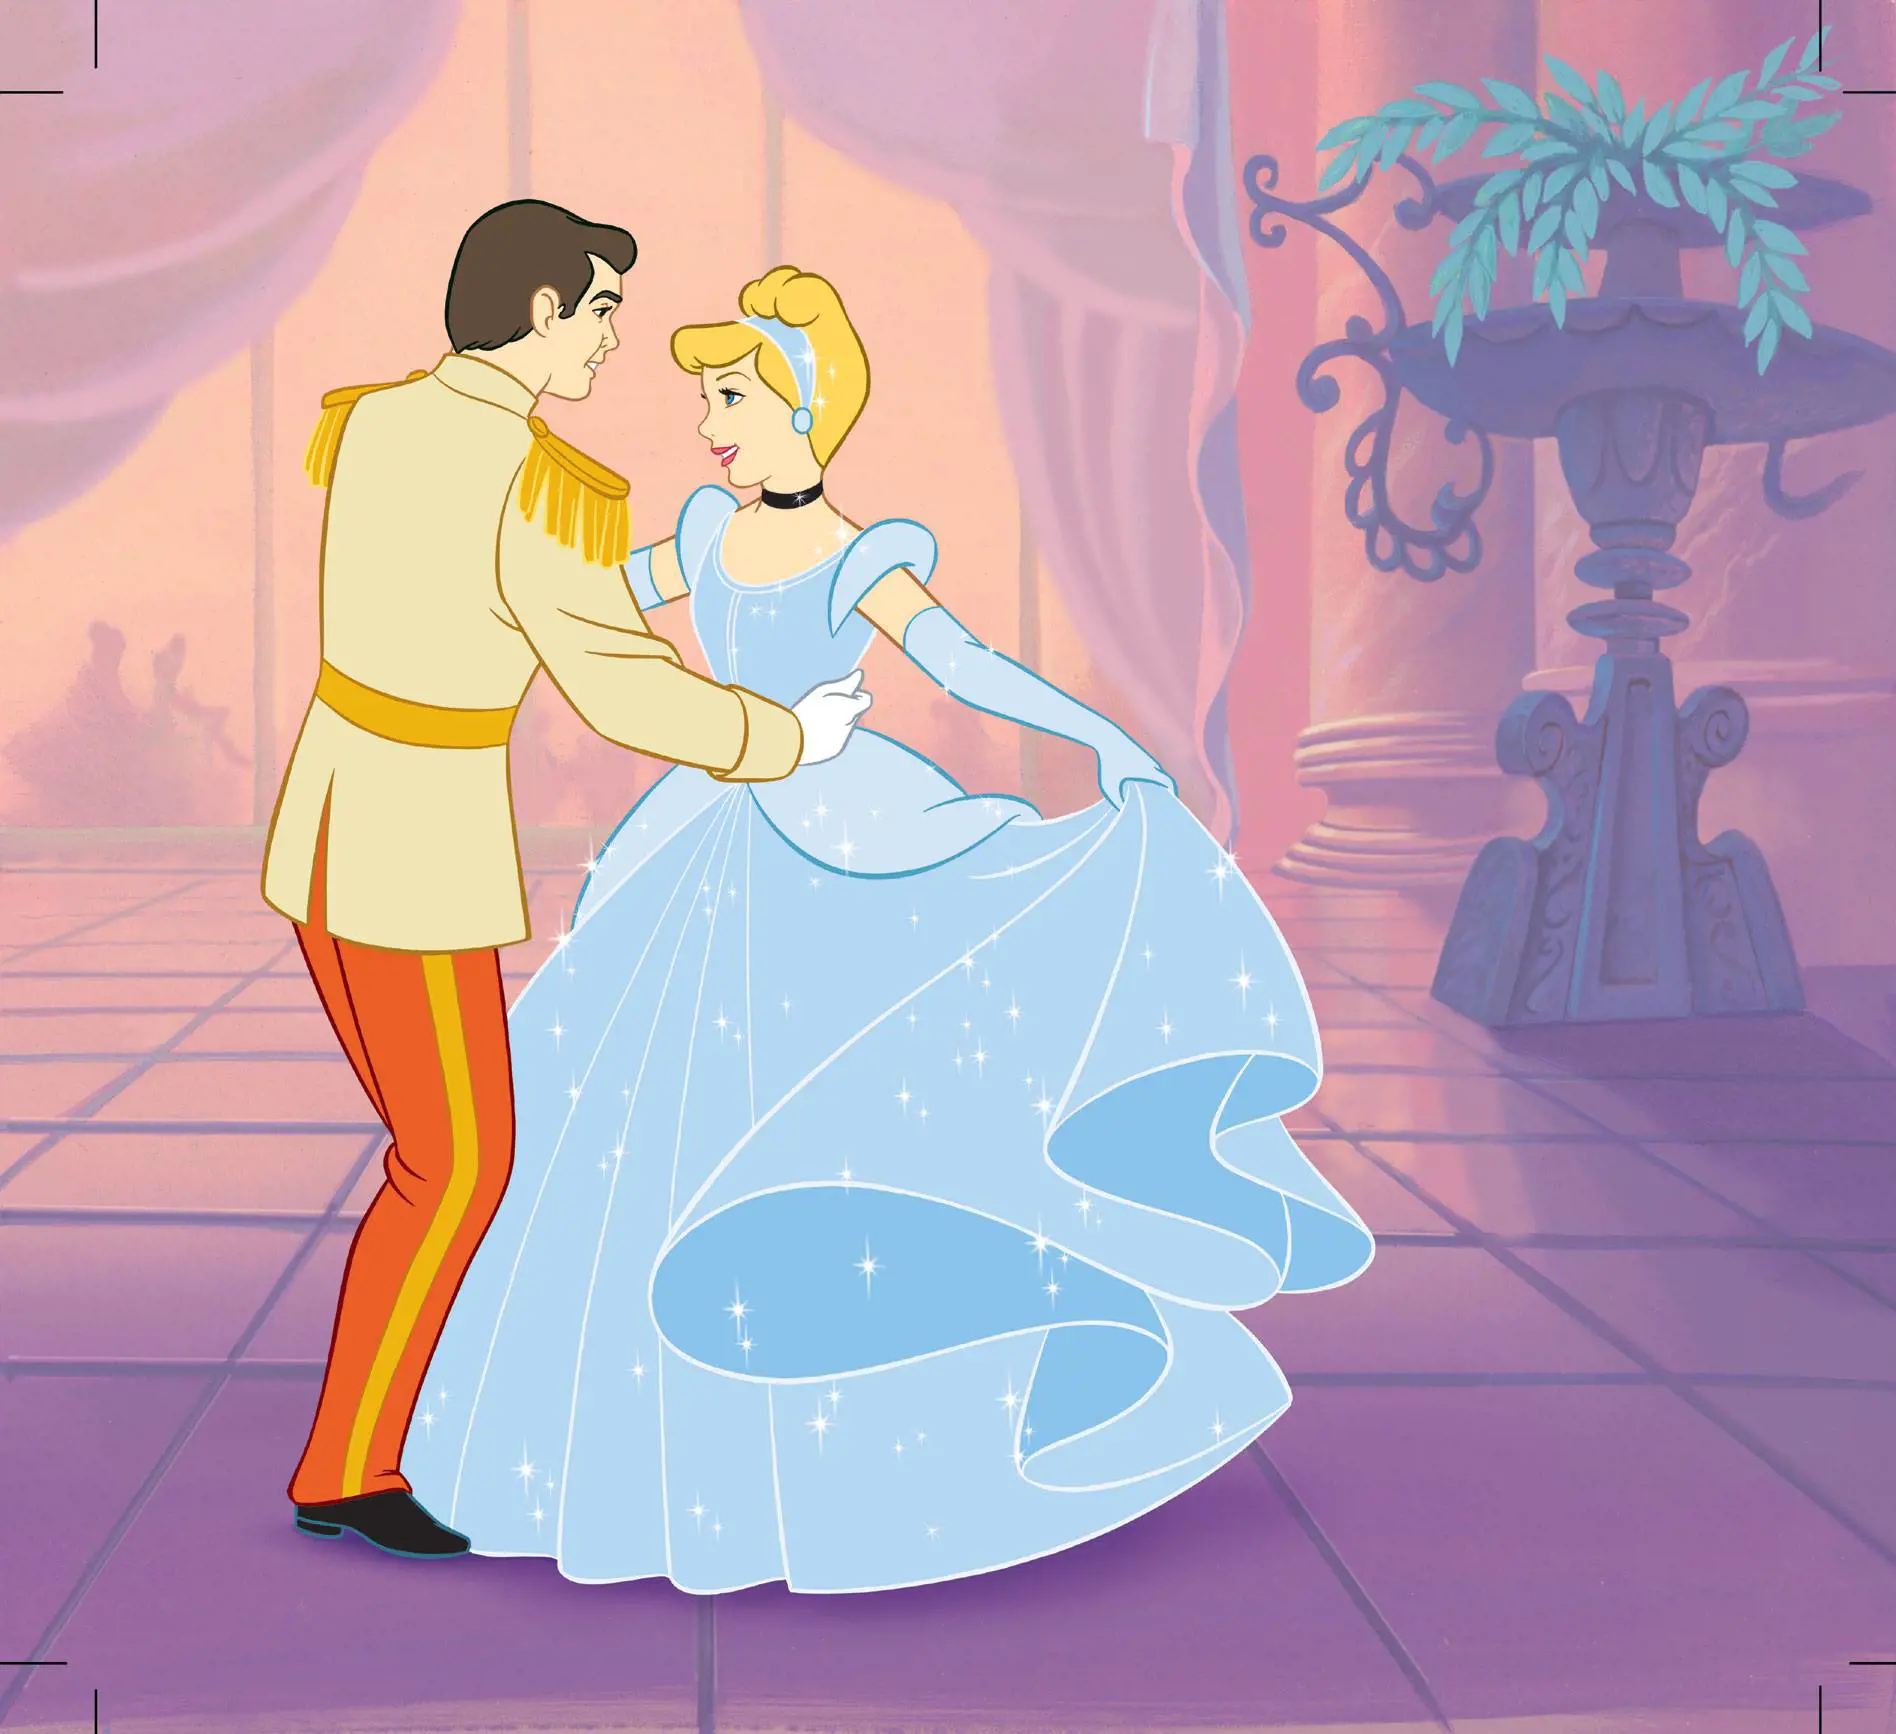 Cinderella Dancing With Her Prince Charming In Her Ball Gown